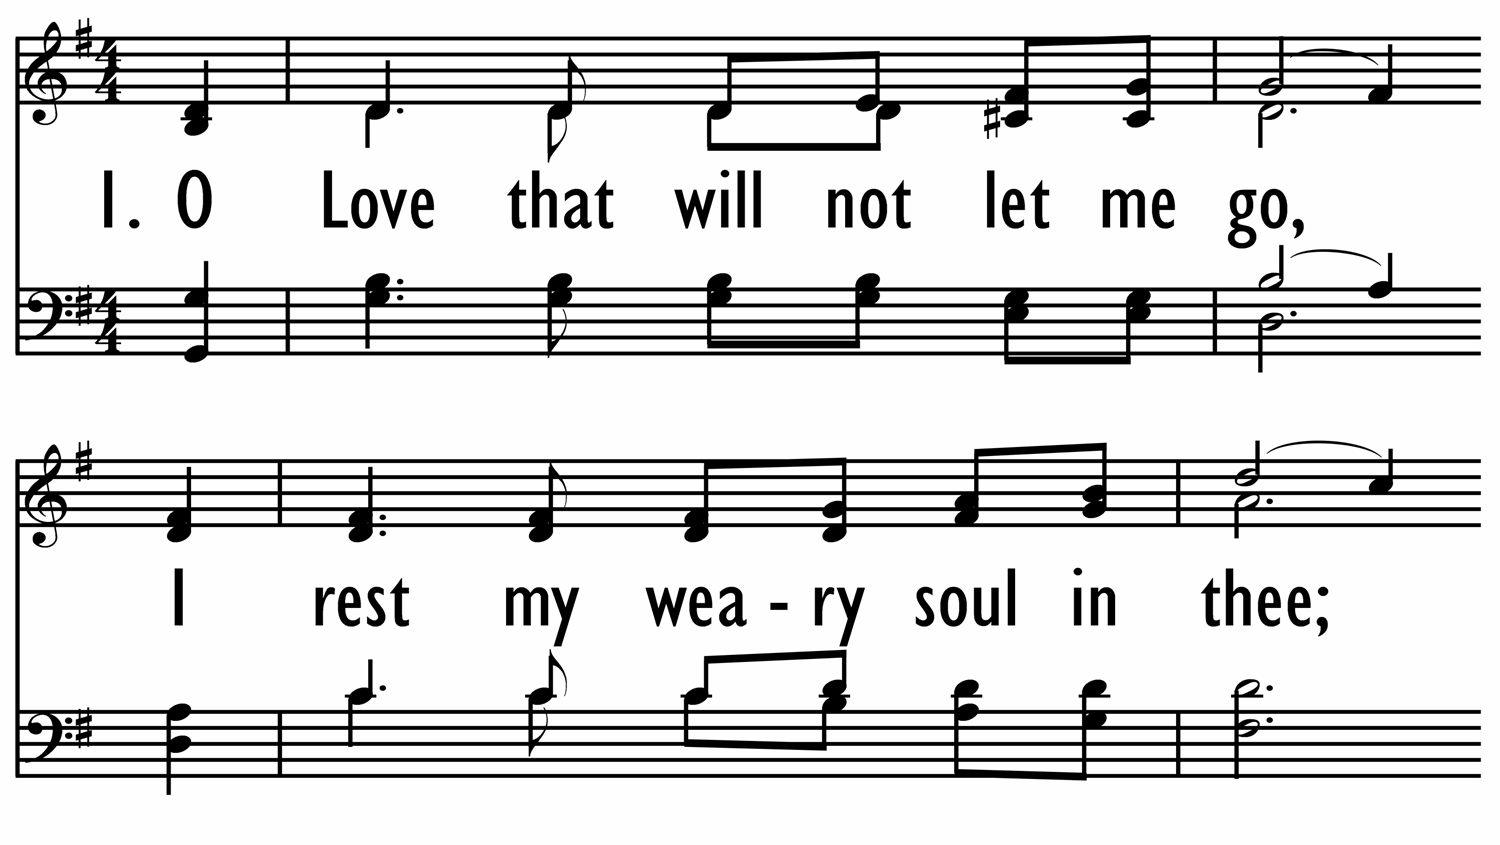 O LOVE THAT WILT NOT LET ME GO-ppt